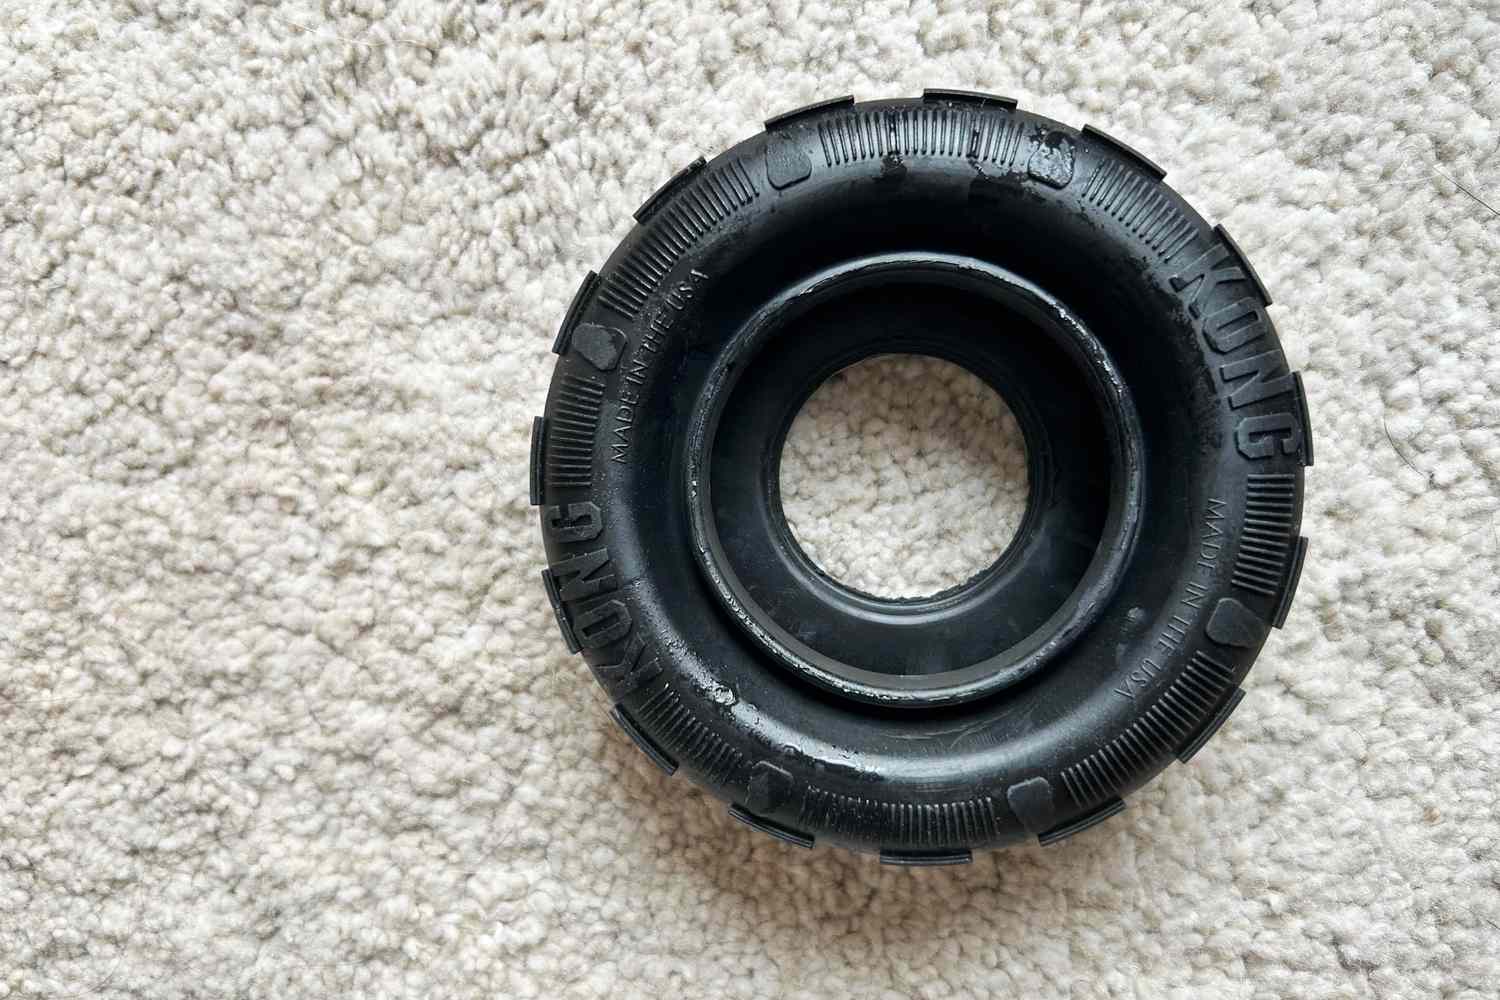 Kong Tire Dog Toy on carpet